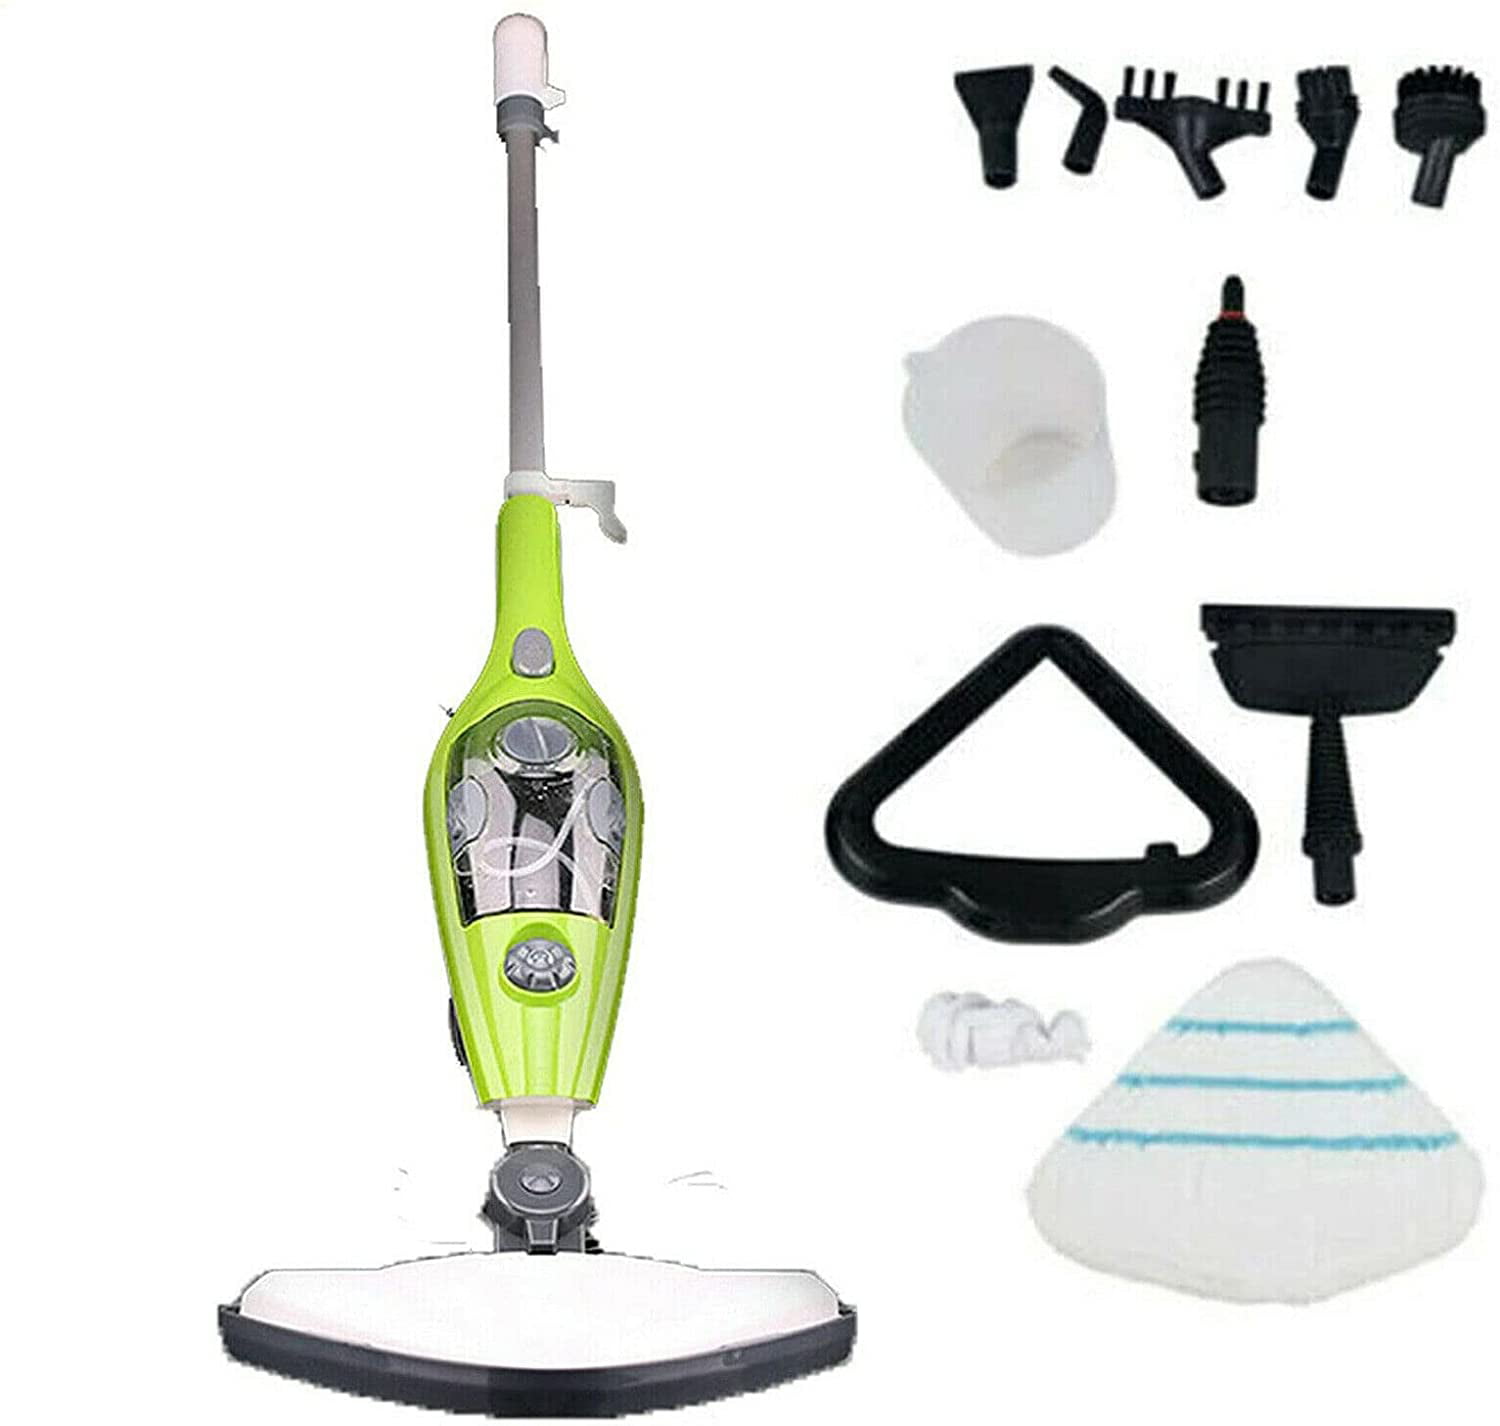 N/D Hot Steam Mop Cleaner 10 In 1 1300W Handheld Hot Steam Mop Floor Cleaning Machine Including 10 Accessories 